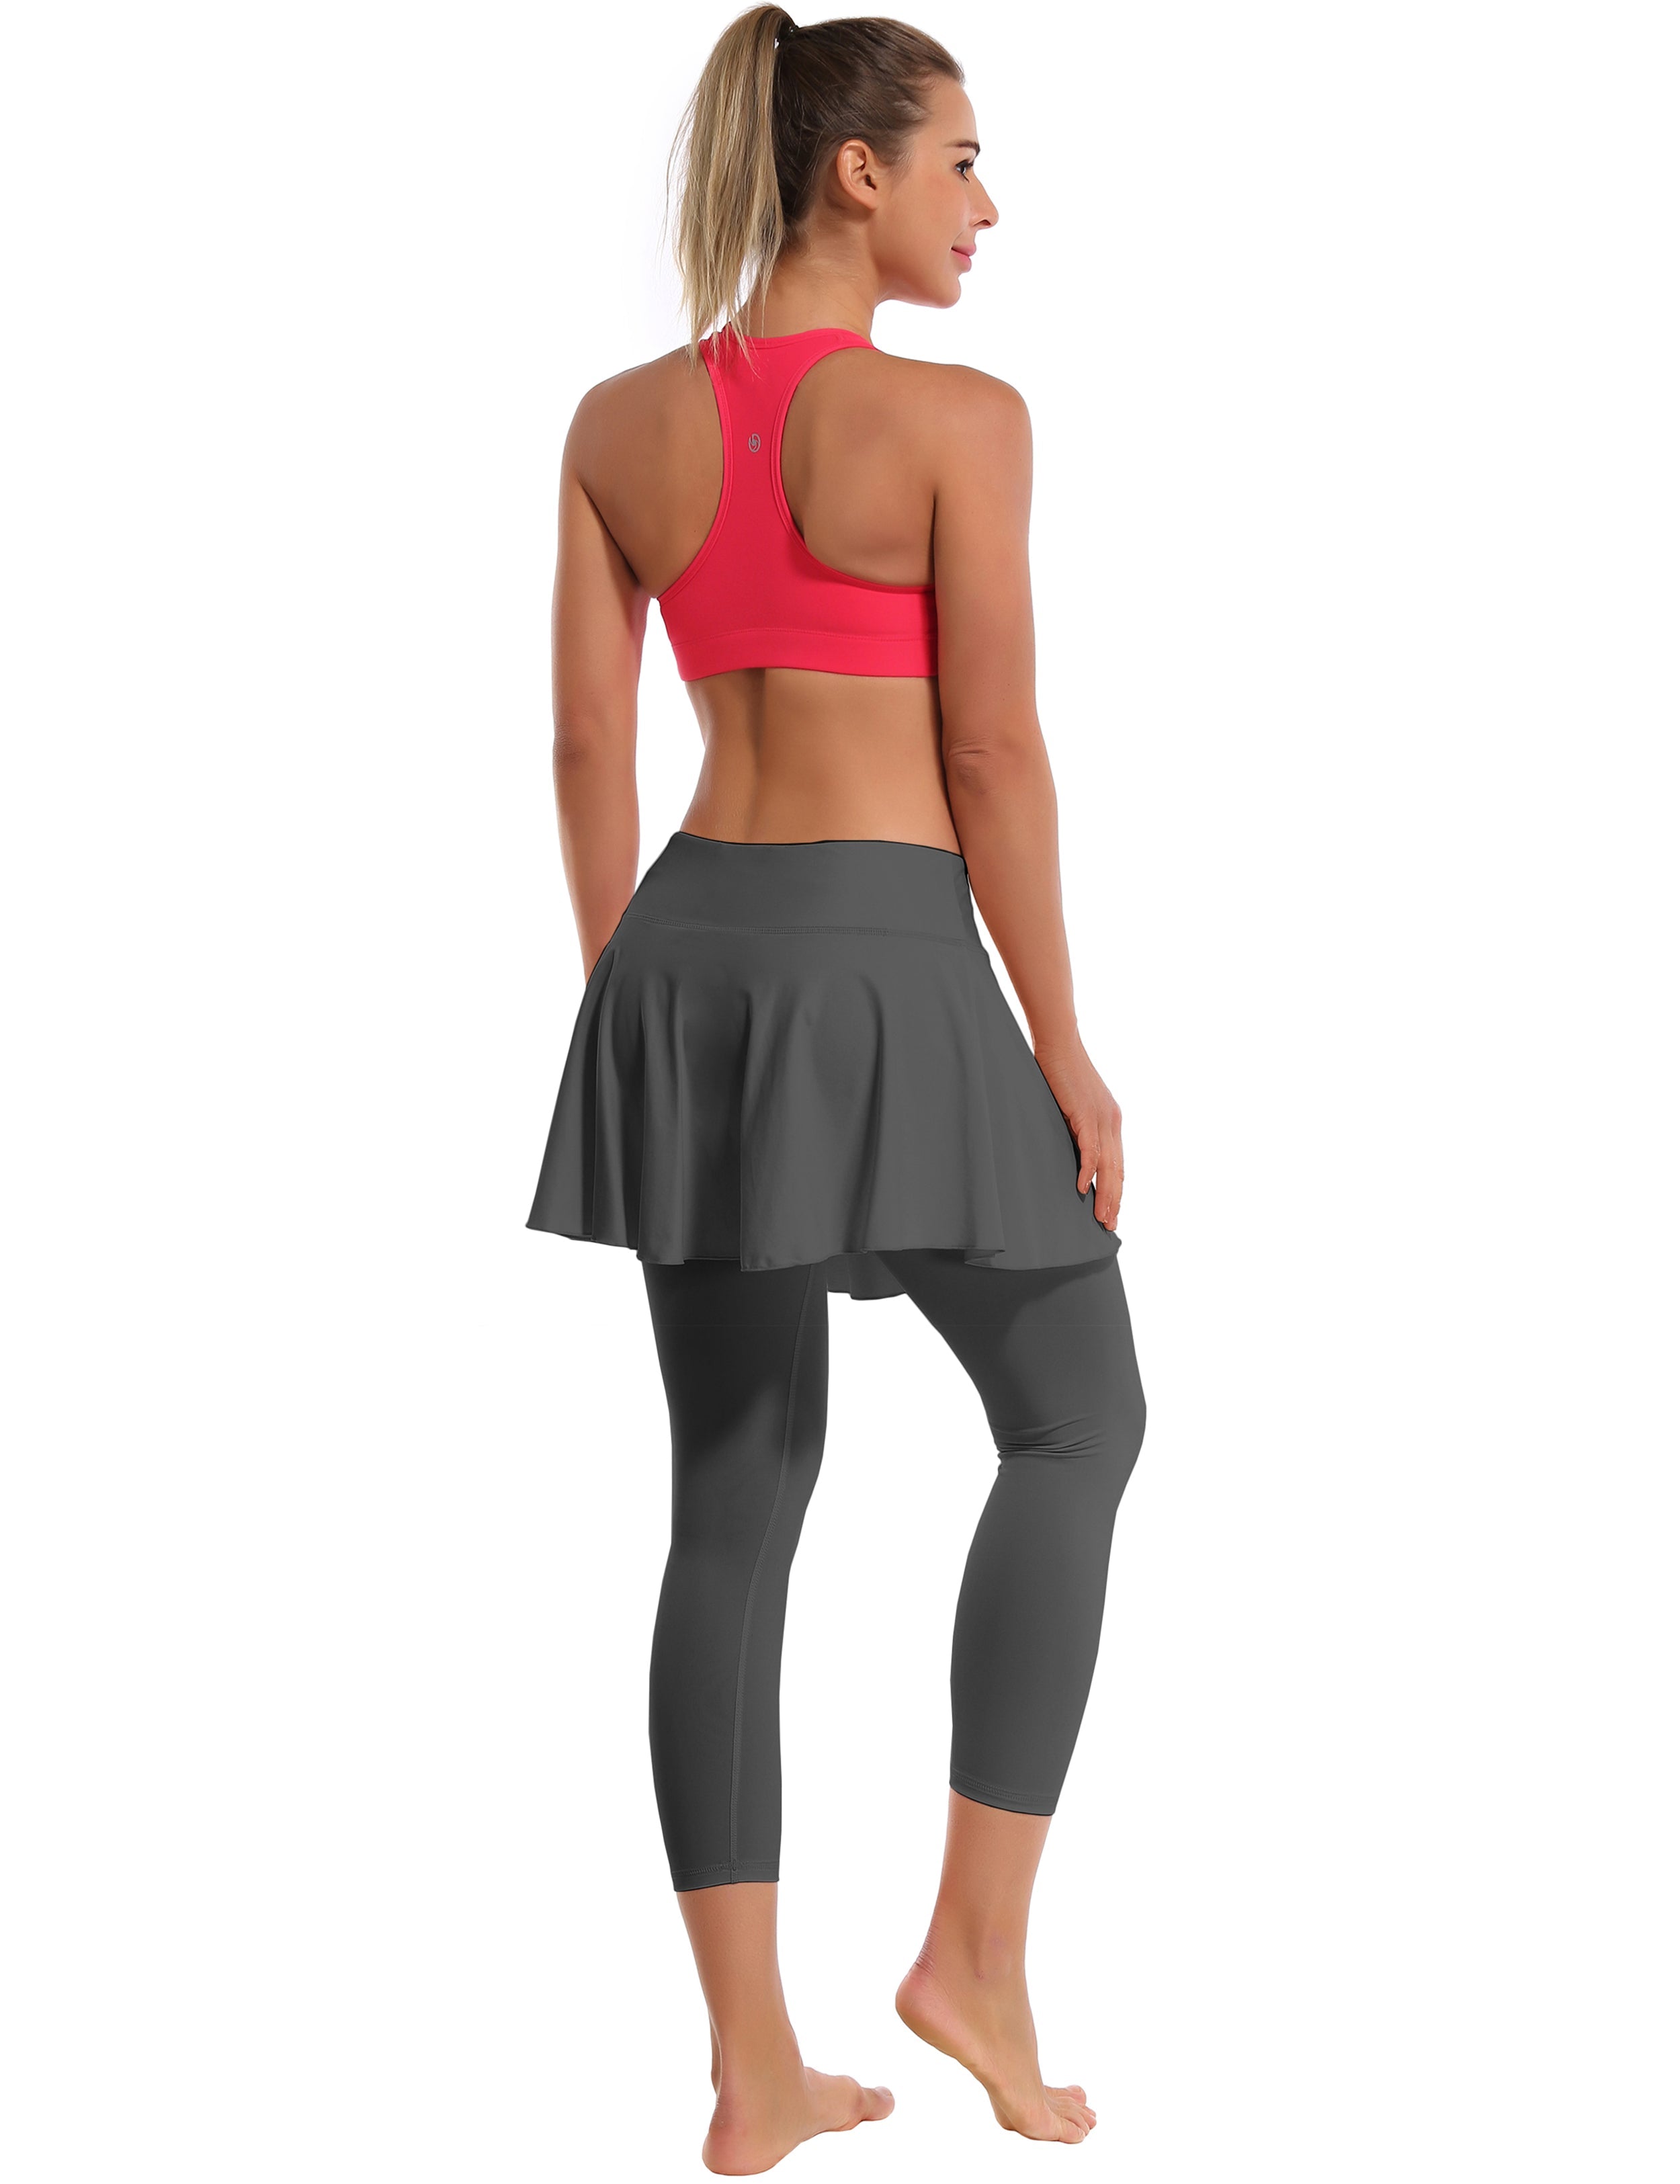 Buy Women Tennis Skirt with Leggings and Pockets Capri Workout